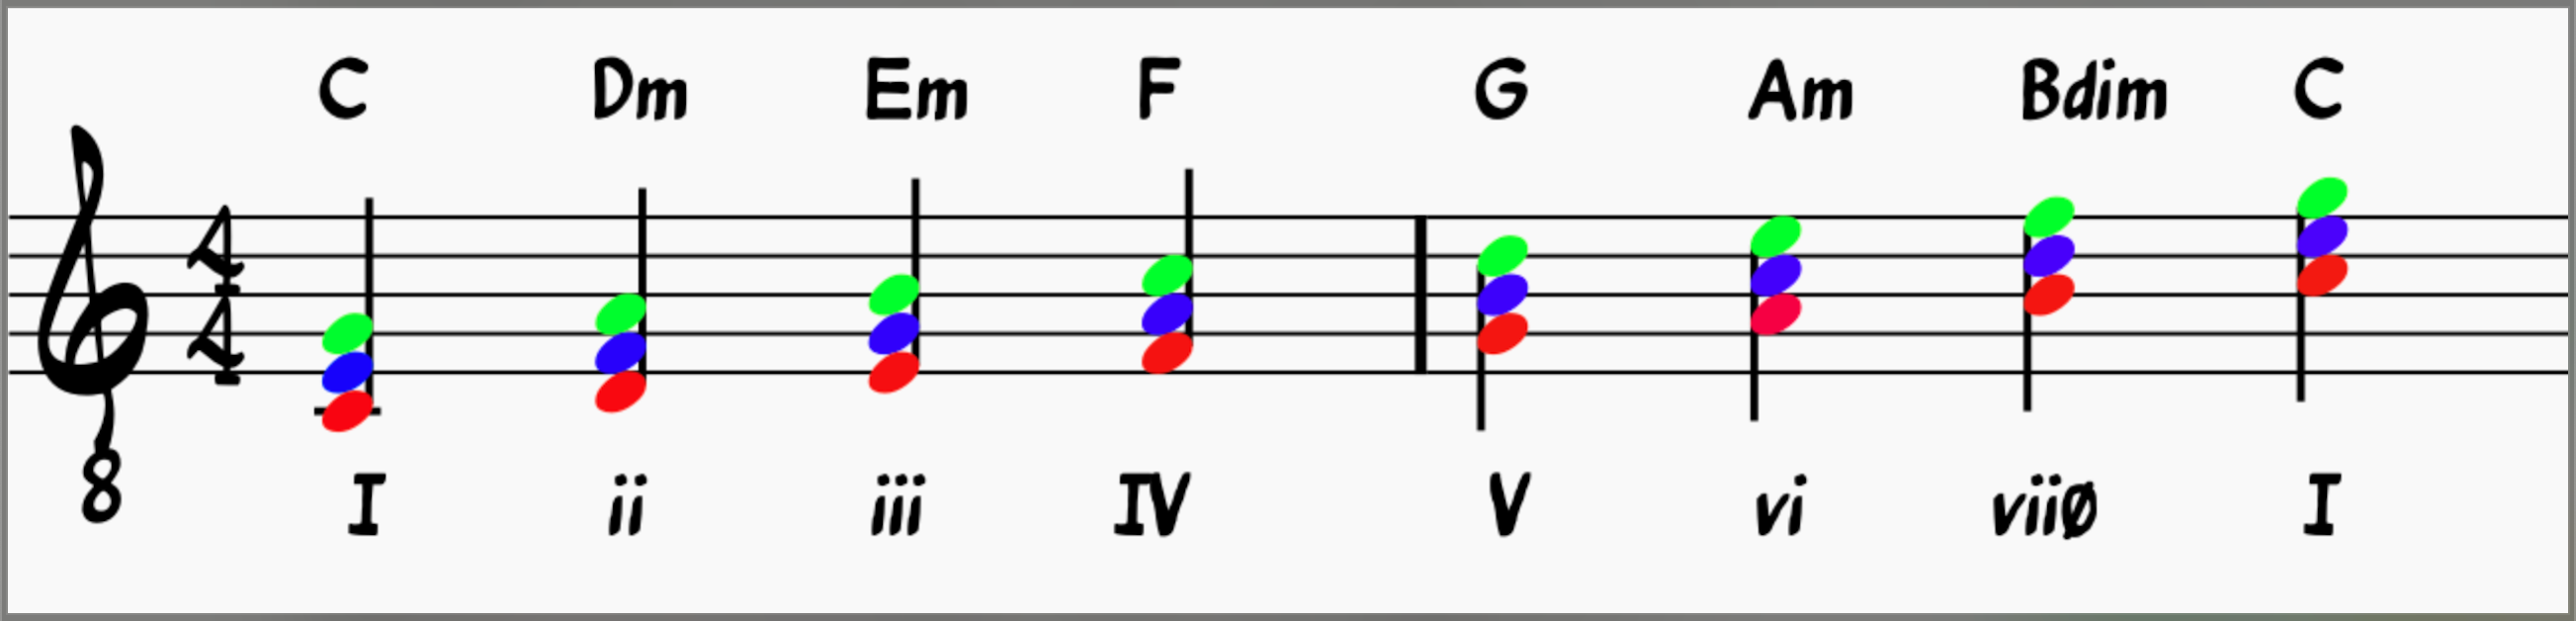 Jazz Chords and Scale Relationships: Diatonic Traids in the Key of C with Scales Highlighted